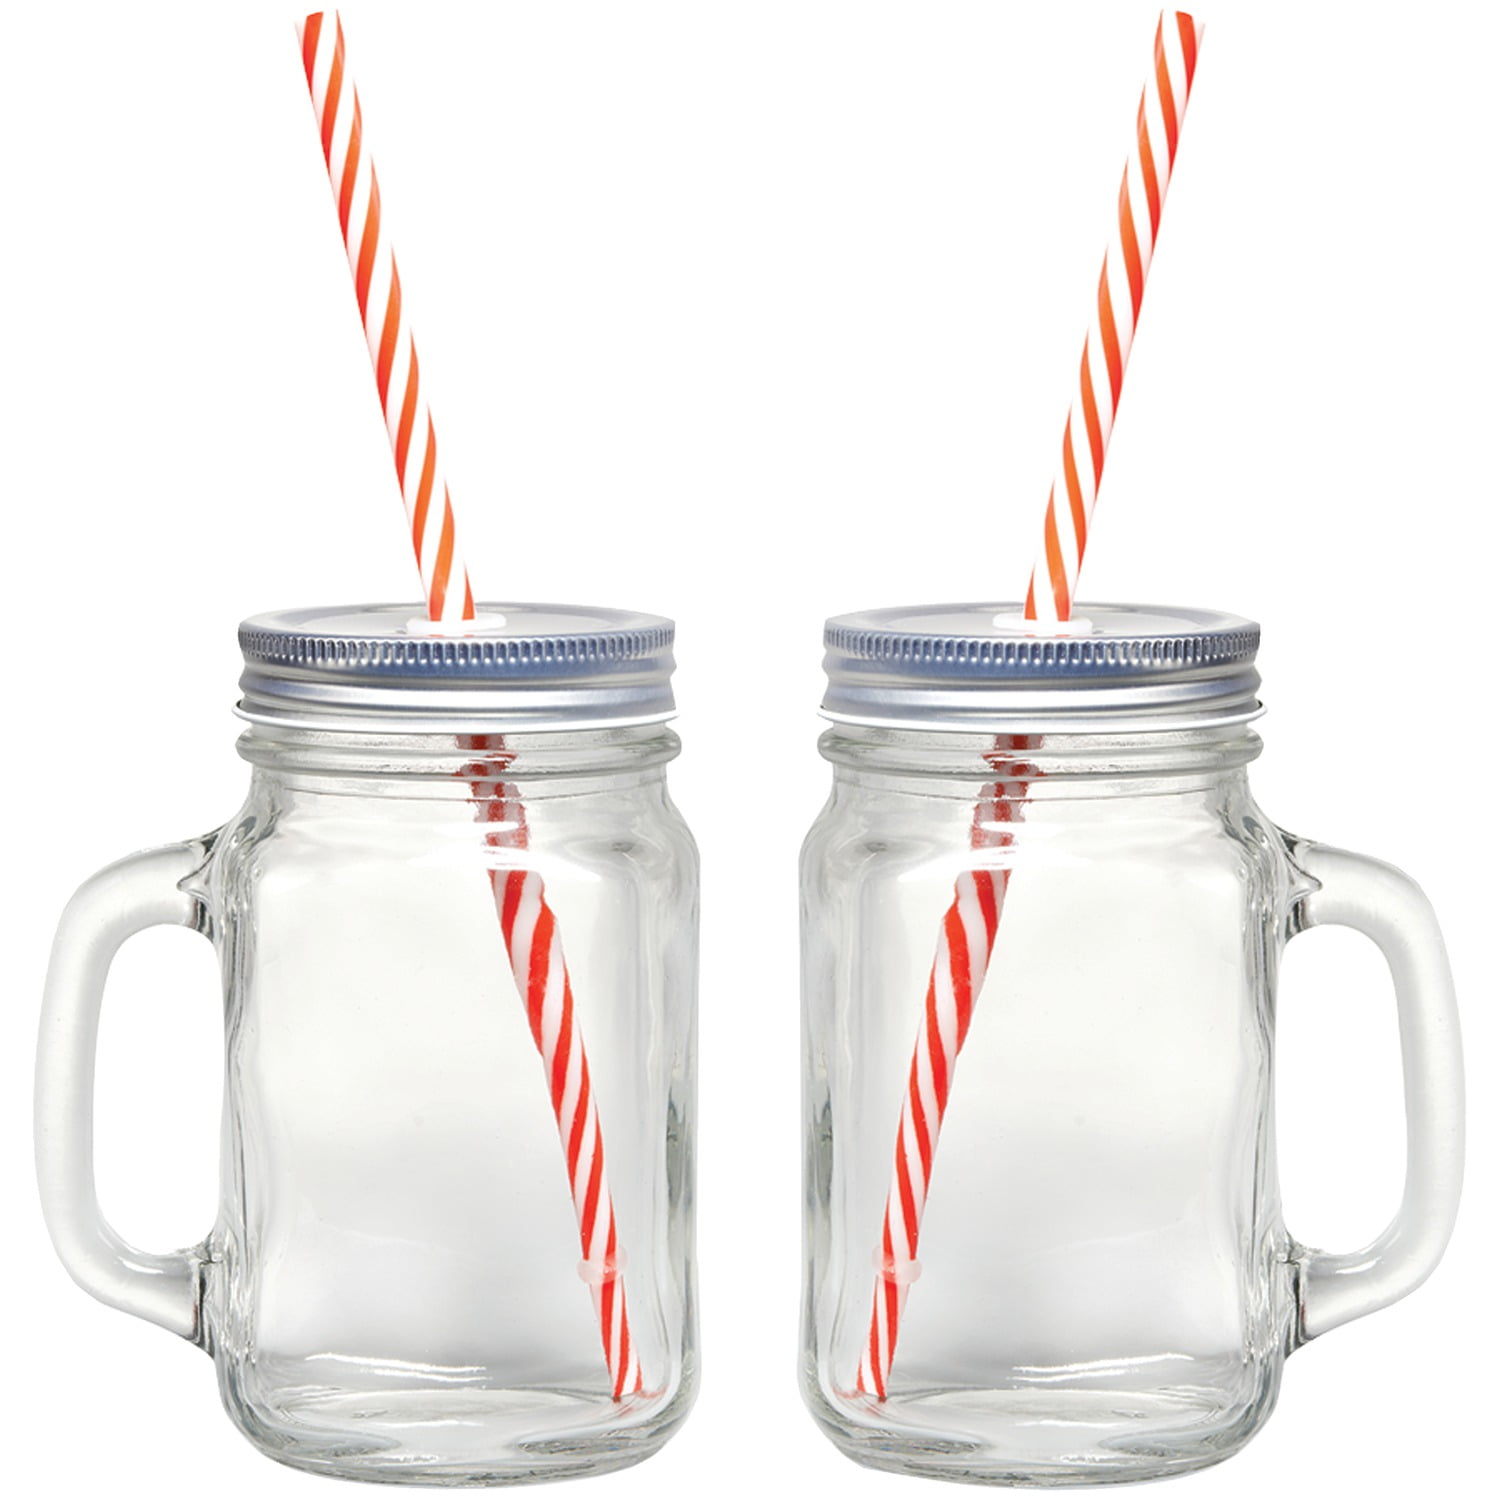 Smile: Mason Jar Mugs with Handle, multi COLORED Lids and Plastic  Straws. 16 Oz. Each. Old Fashion Drinking Glasses…